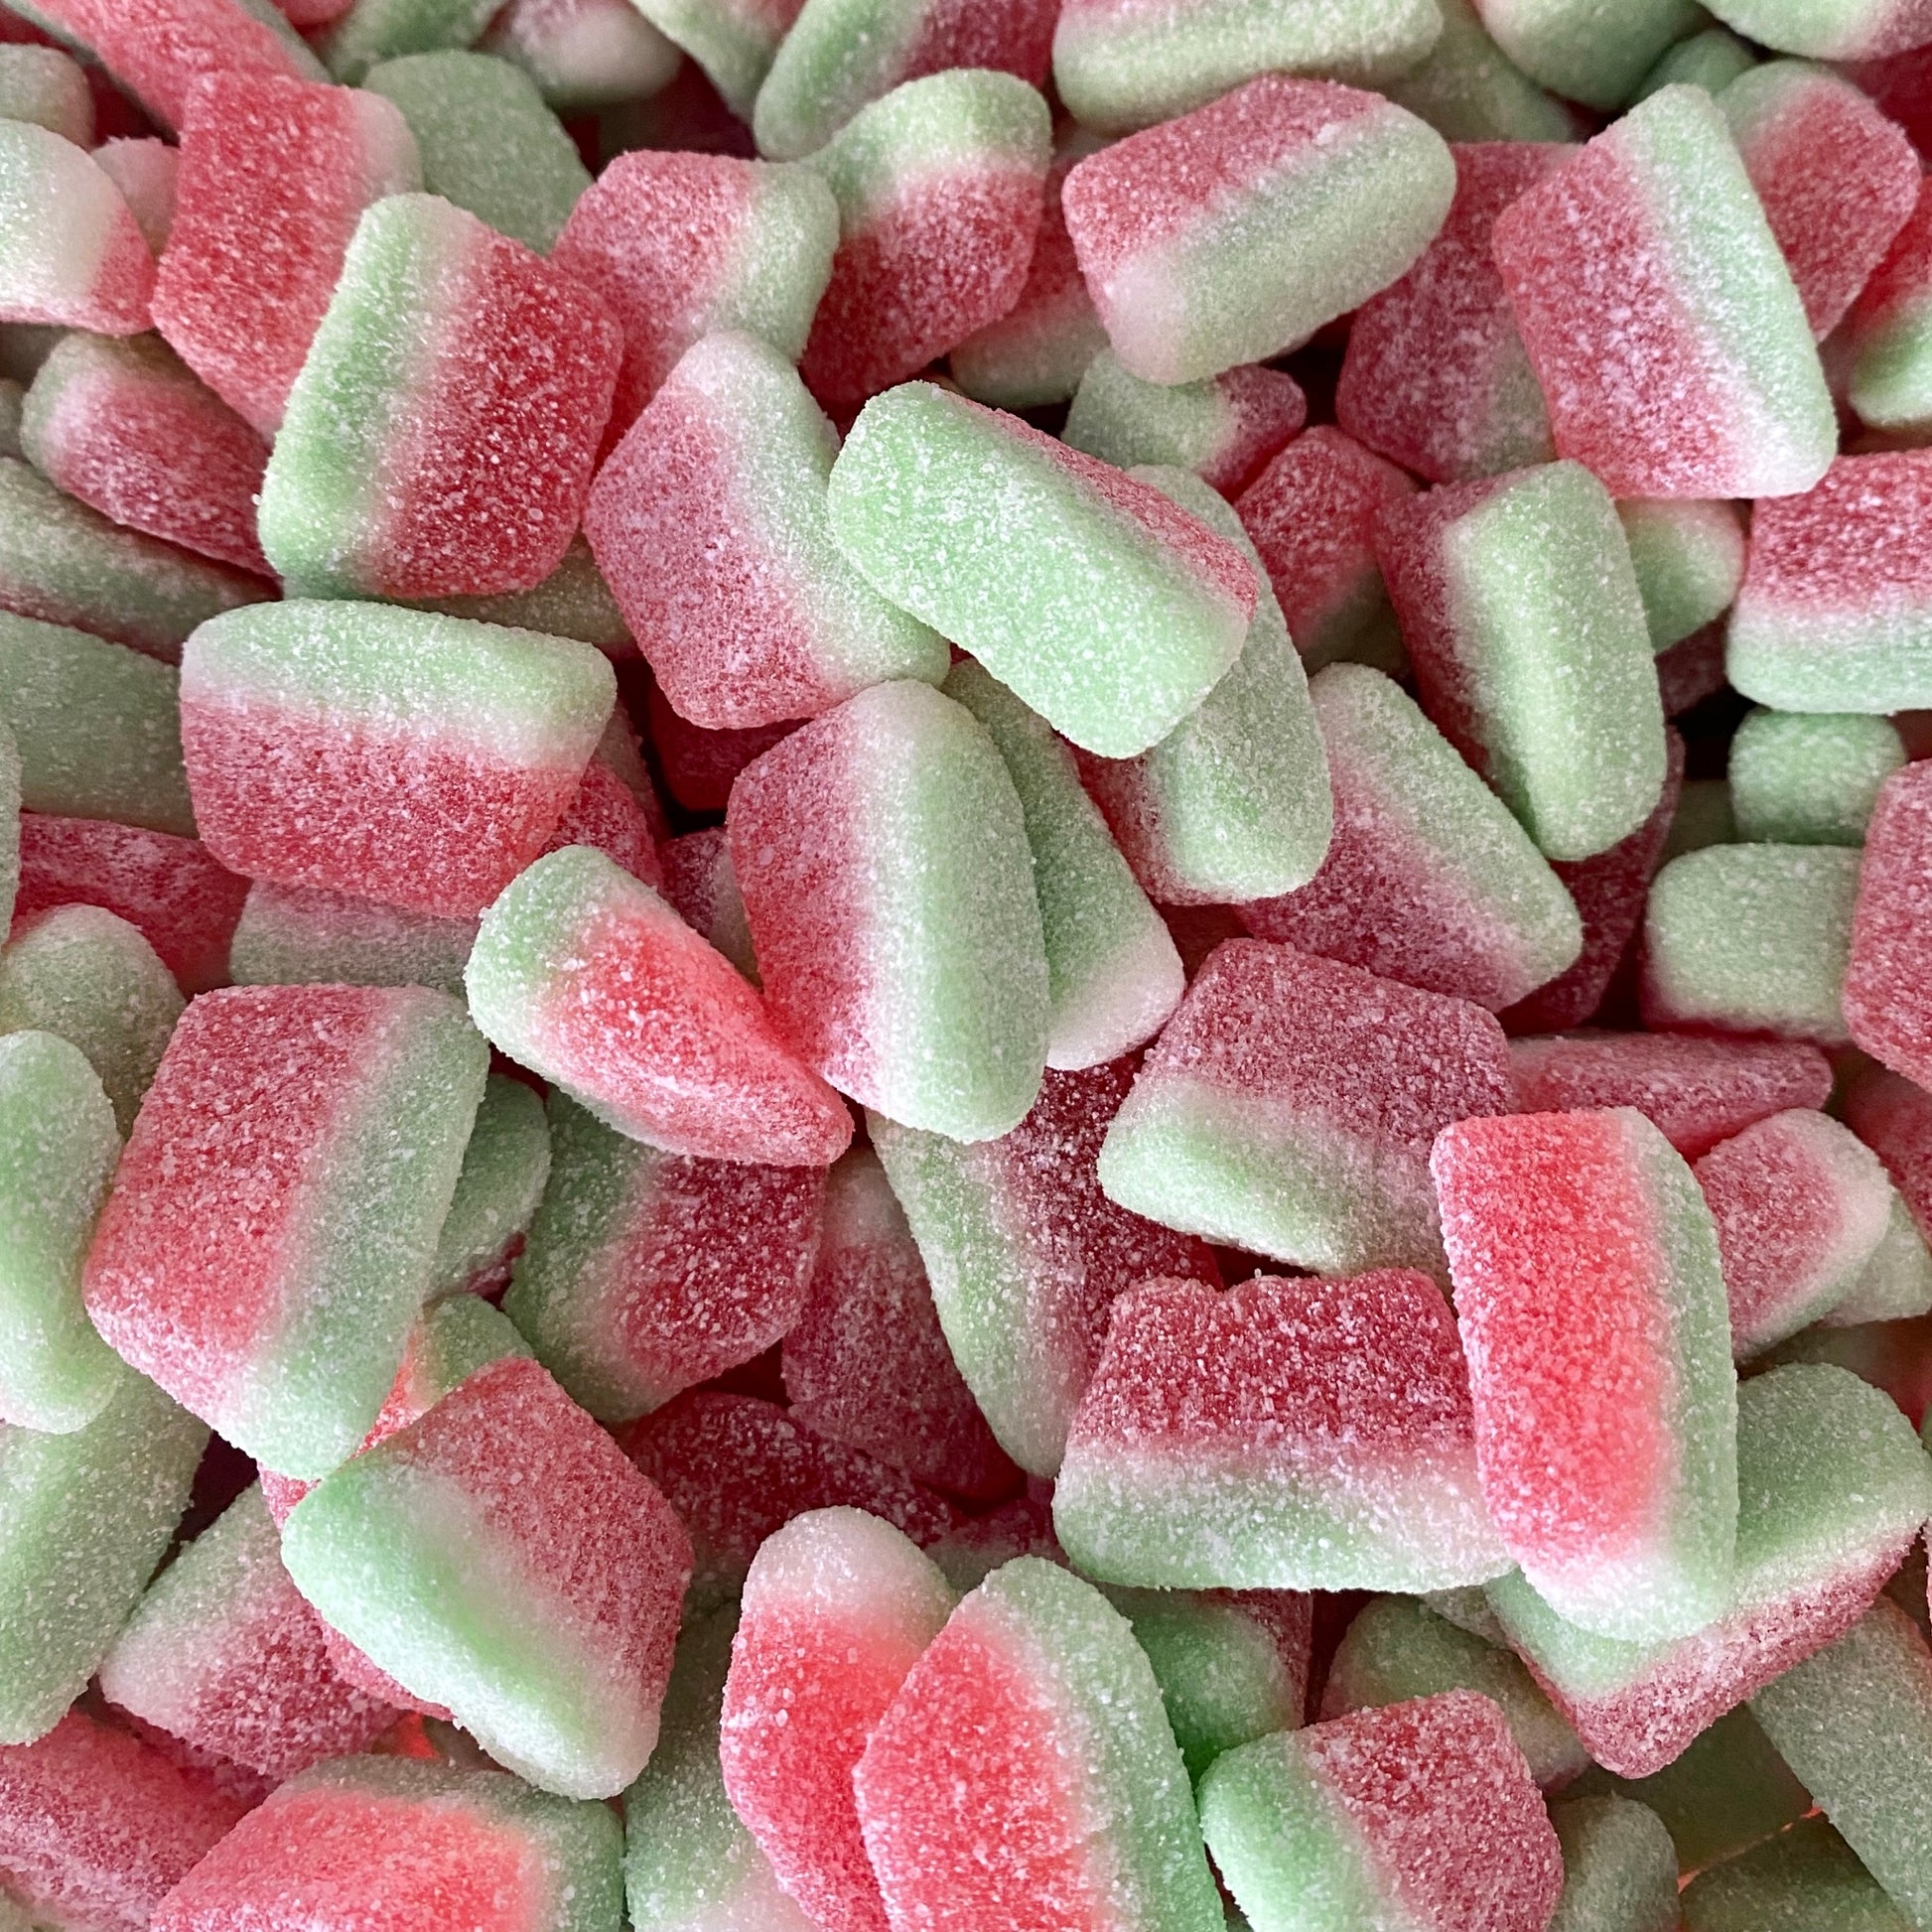 Pick & Mix, Retro, 90's and more! – Gumdrop Lolly Shop